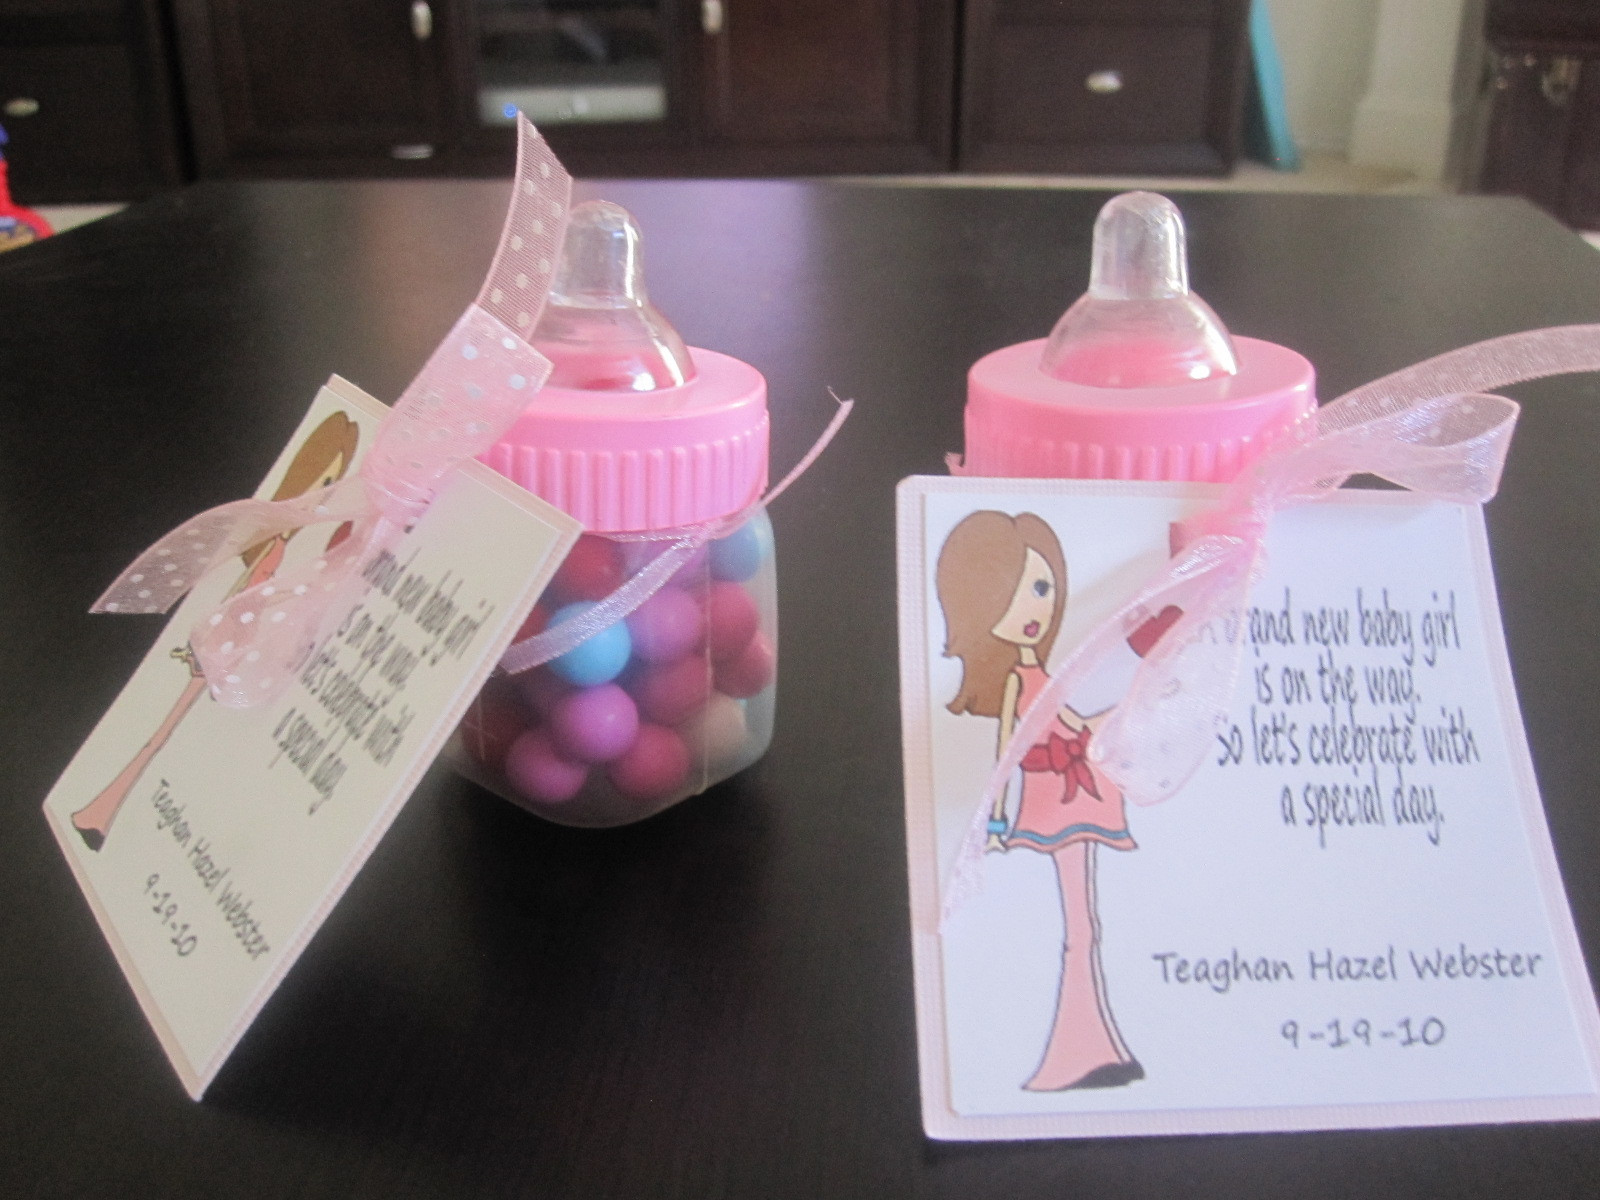 Thank You Gifts For Baby Shower Guests
 Mariposa Creations Baby Shower Invites & Favors and Thank